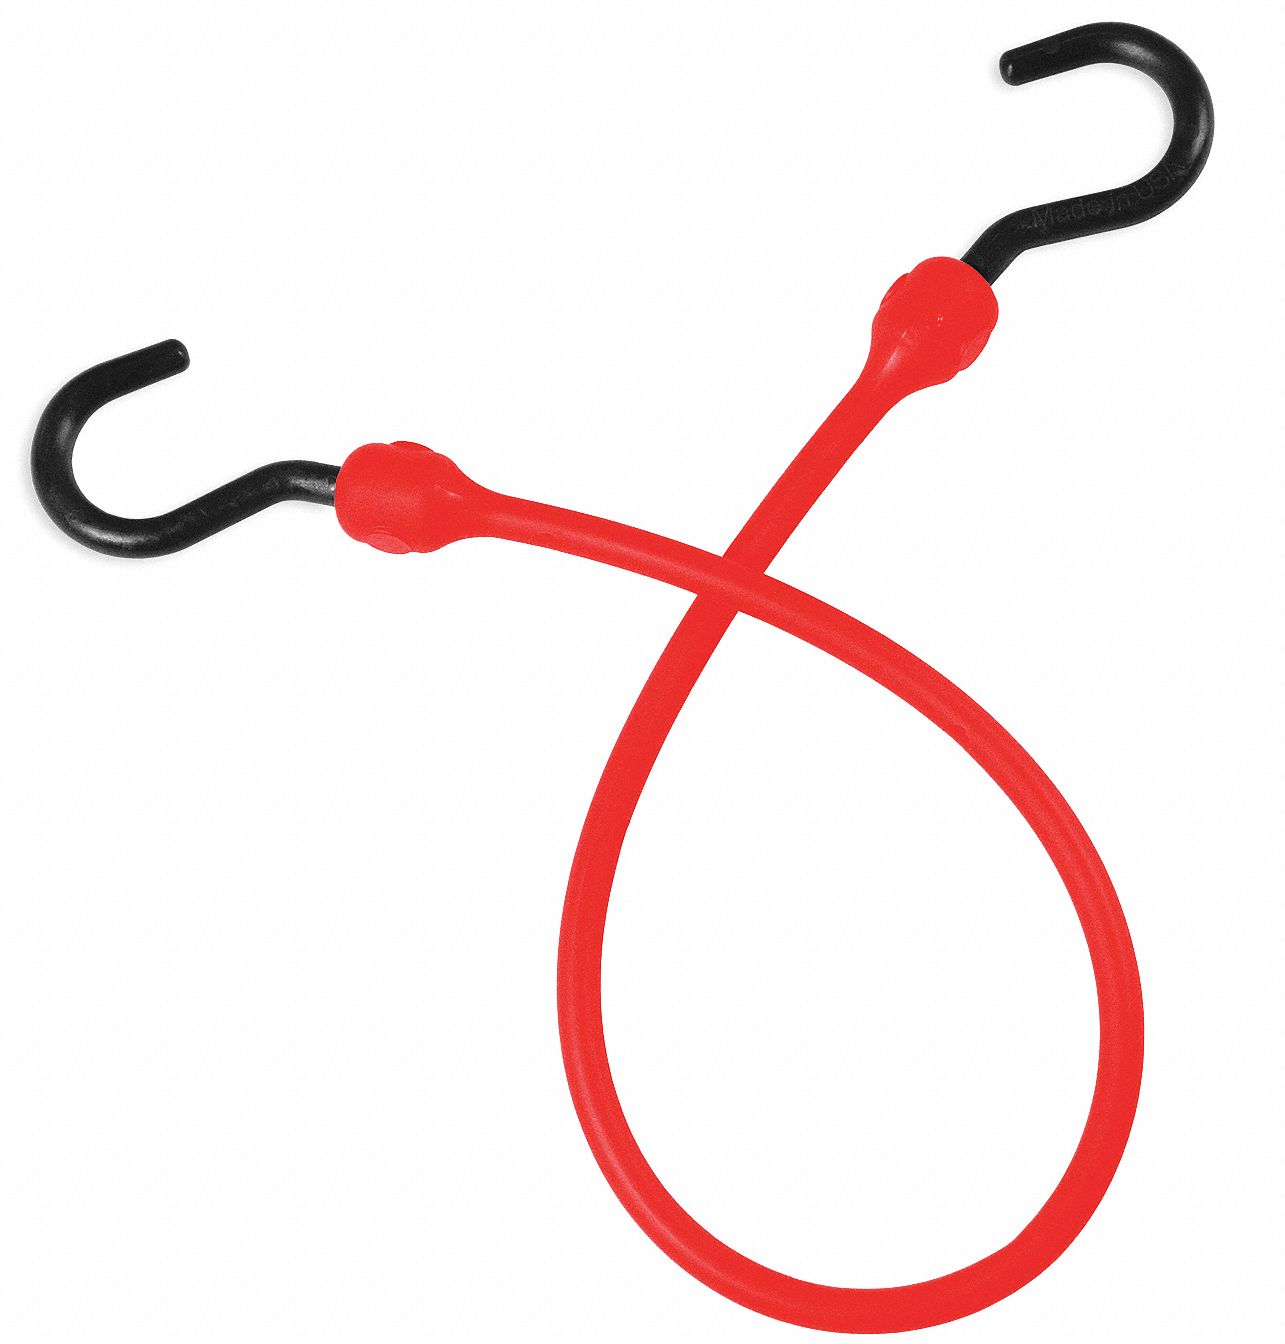 bungee cord red